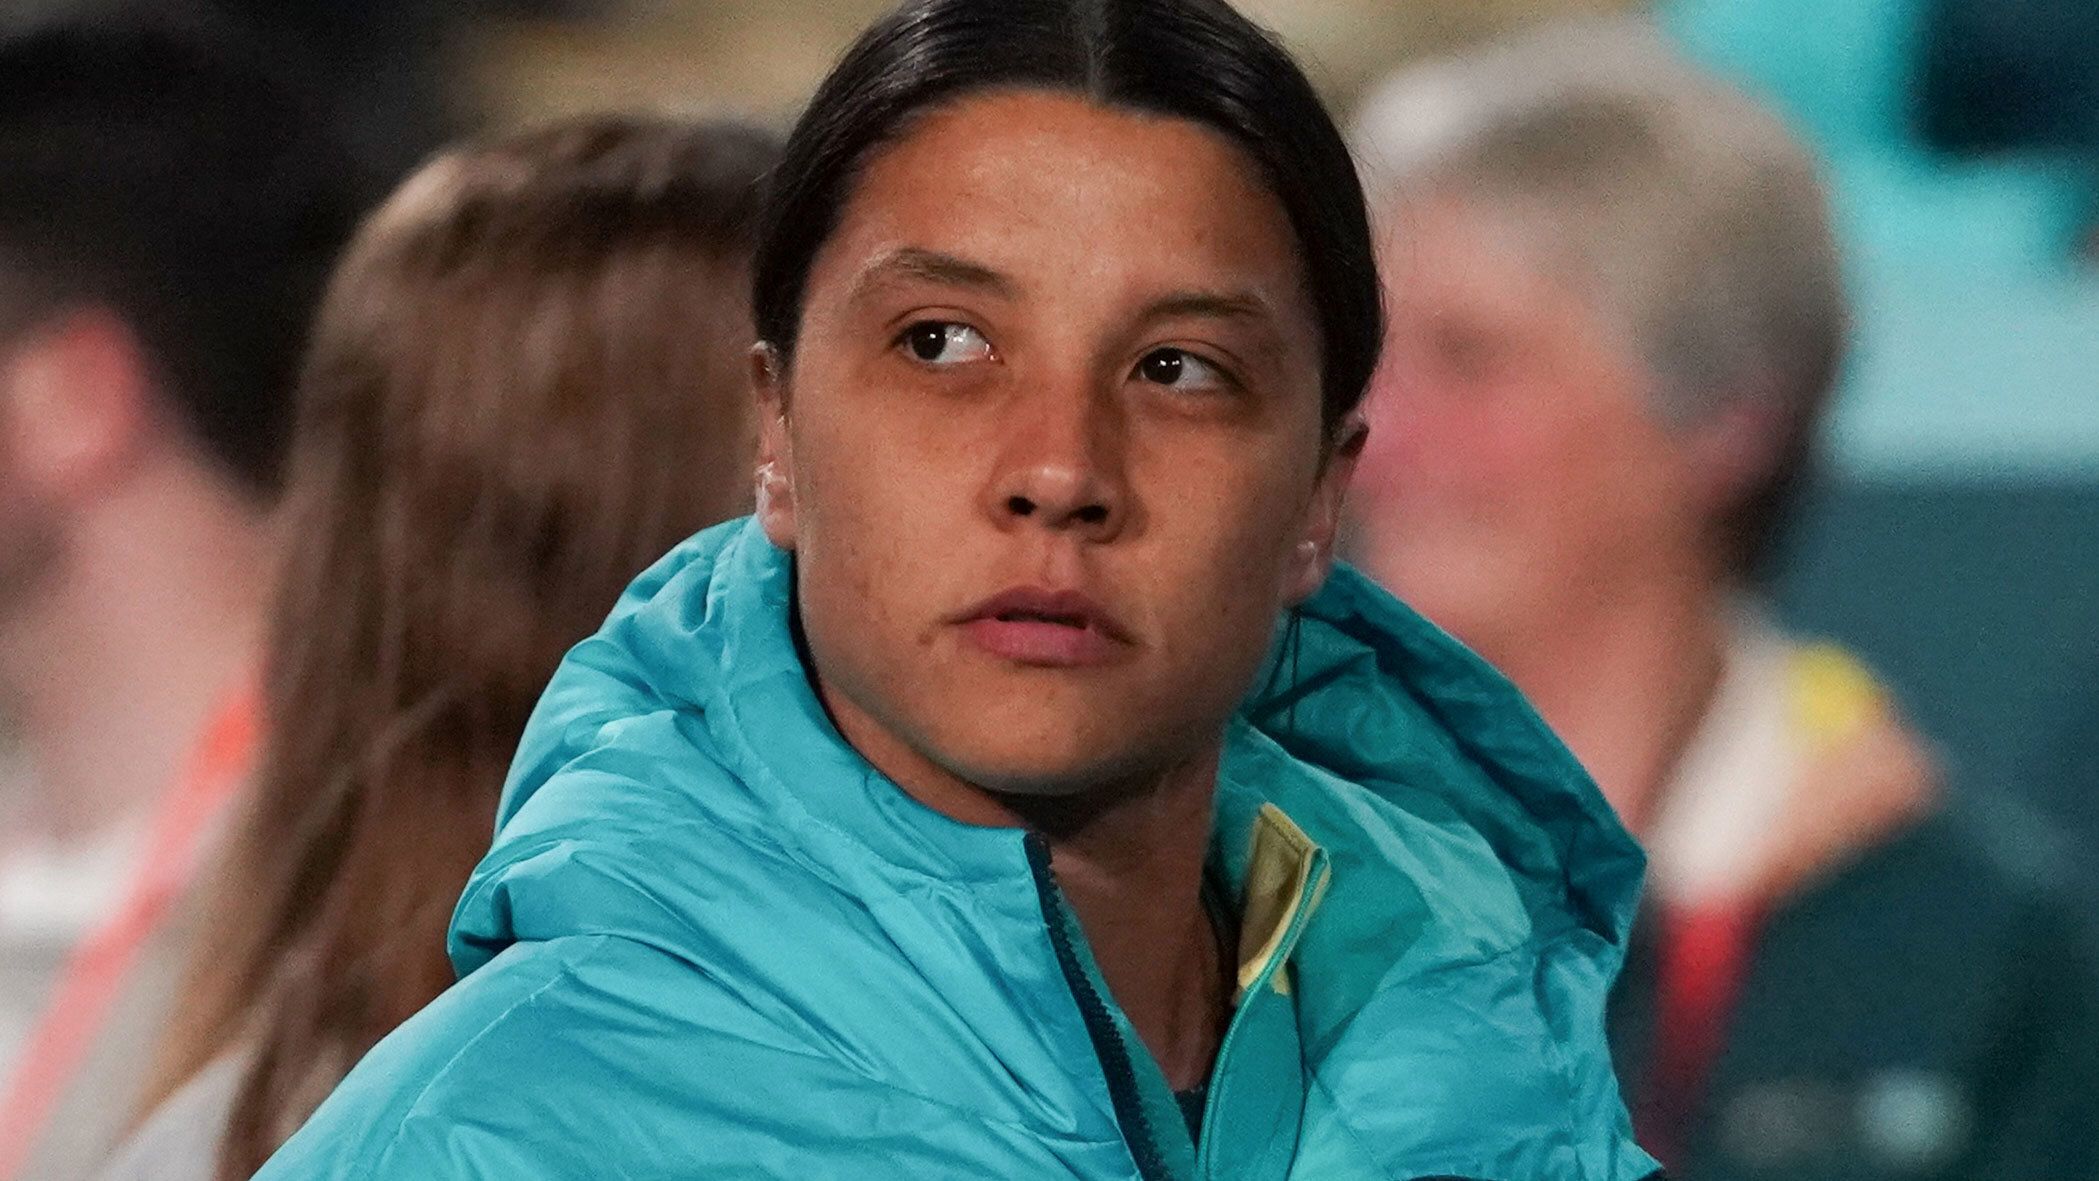 An emotional Sam Kerr is pictured on the sideline as the Matildas get their World Cup campaign started against Ireland.